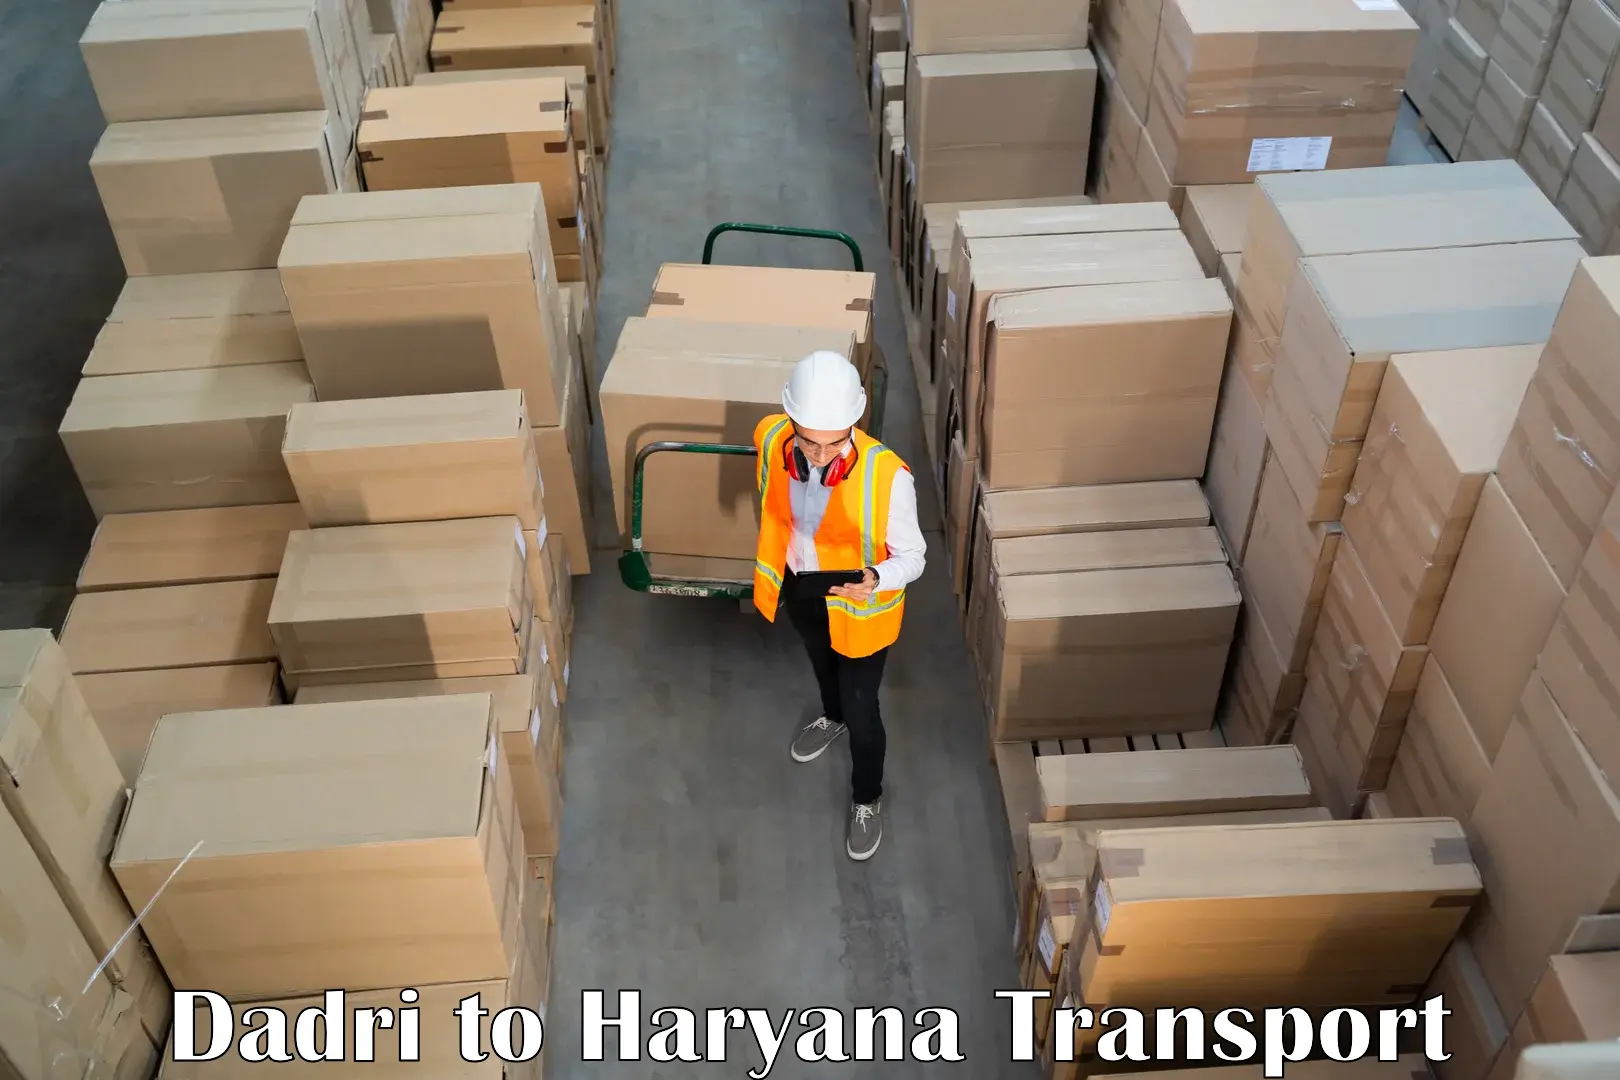 Daily parcel service transport Dadri to Chaudhary Charan Singh Haryana Agricultural University Hisar